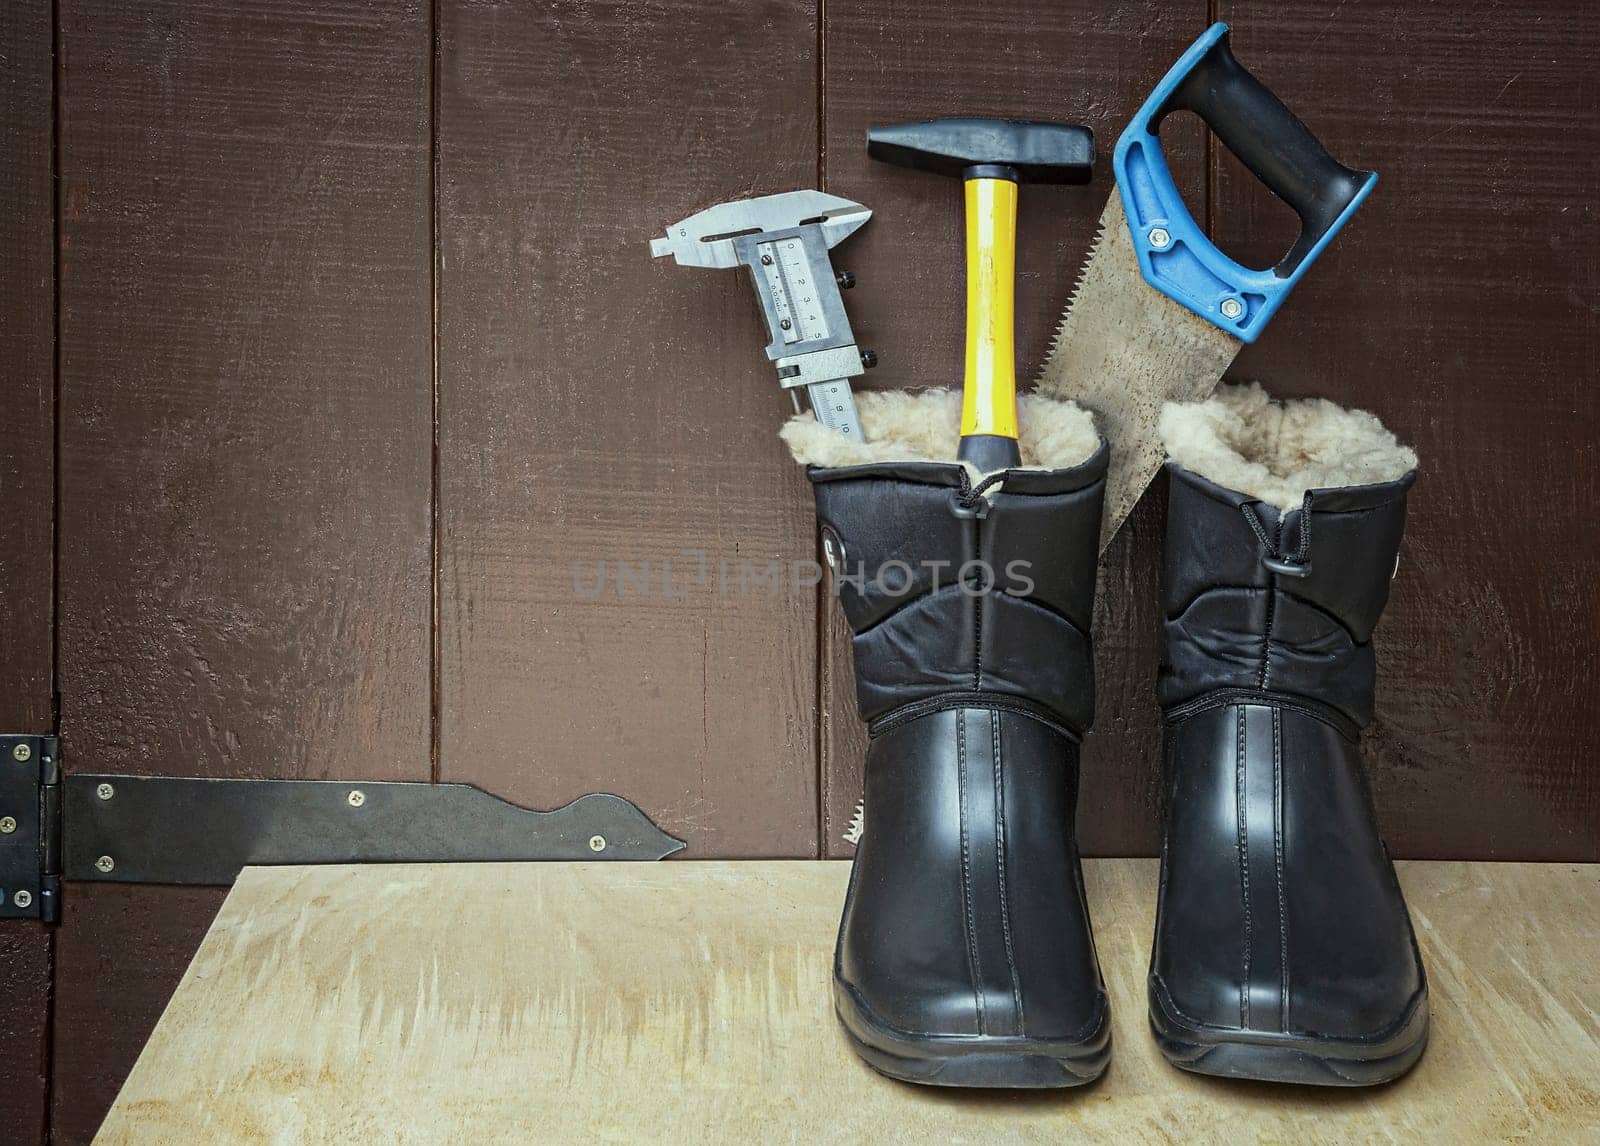 Convenient for operation warm waterproof boots and work tools.